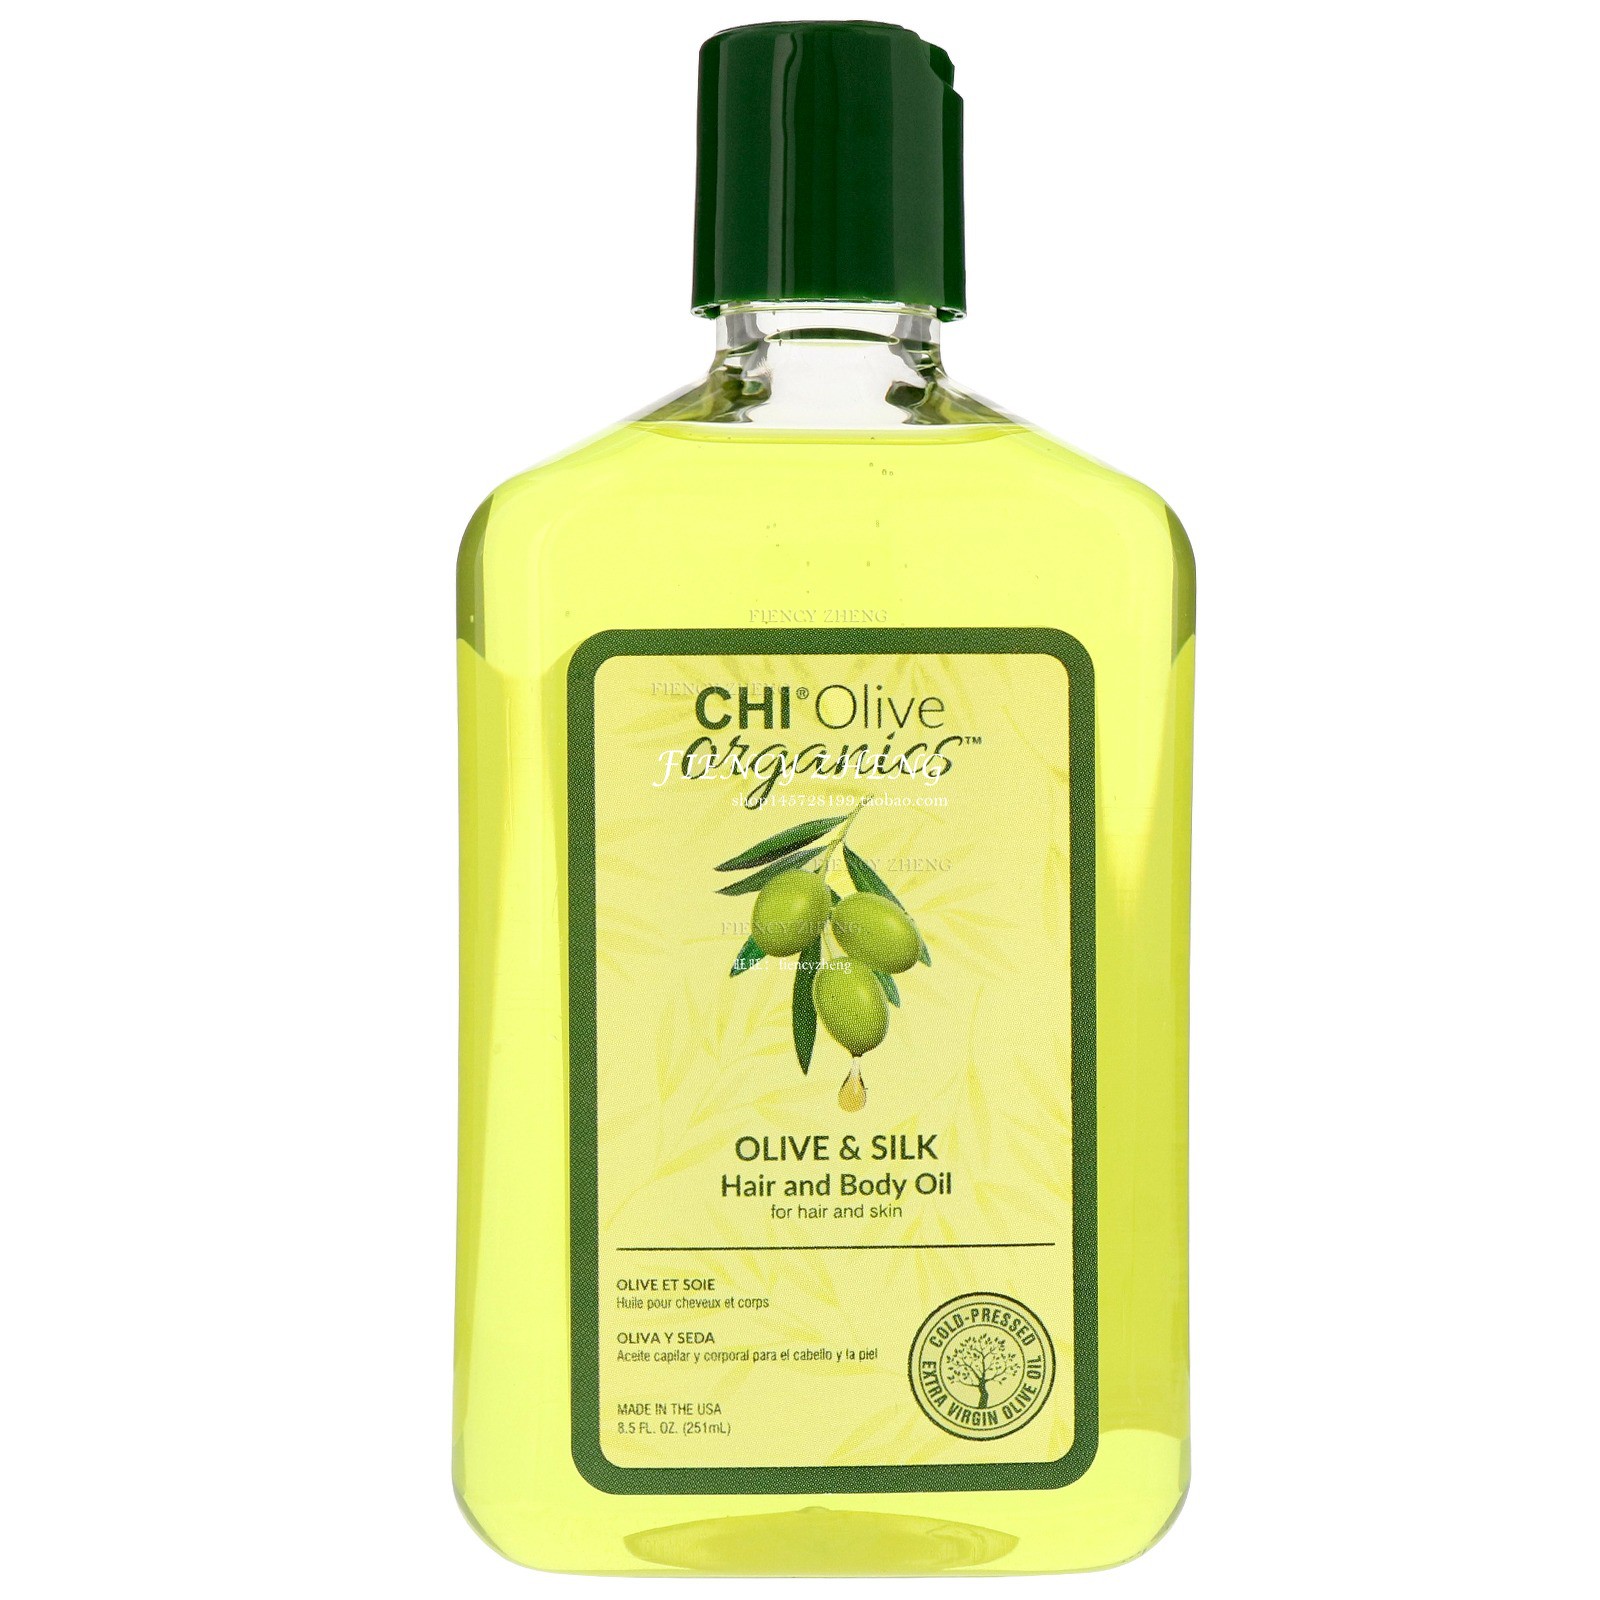 CHI Olive & Silk Hair and Body Oil 251ml